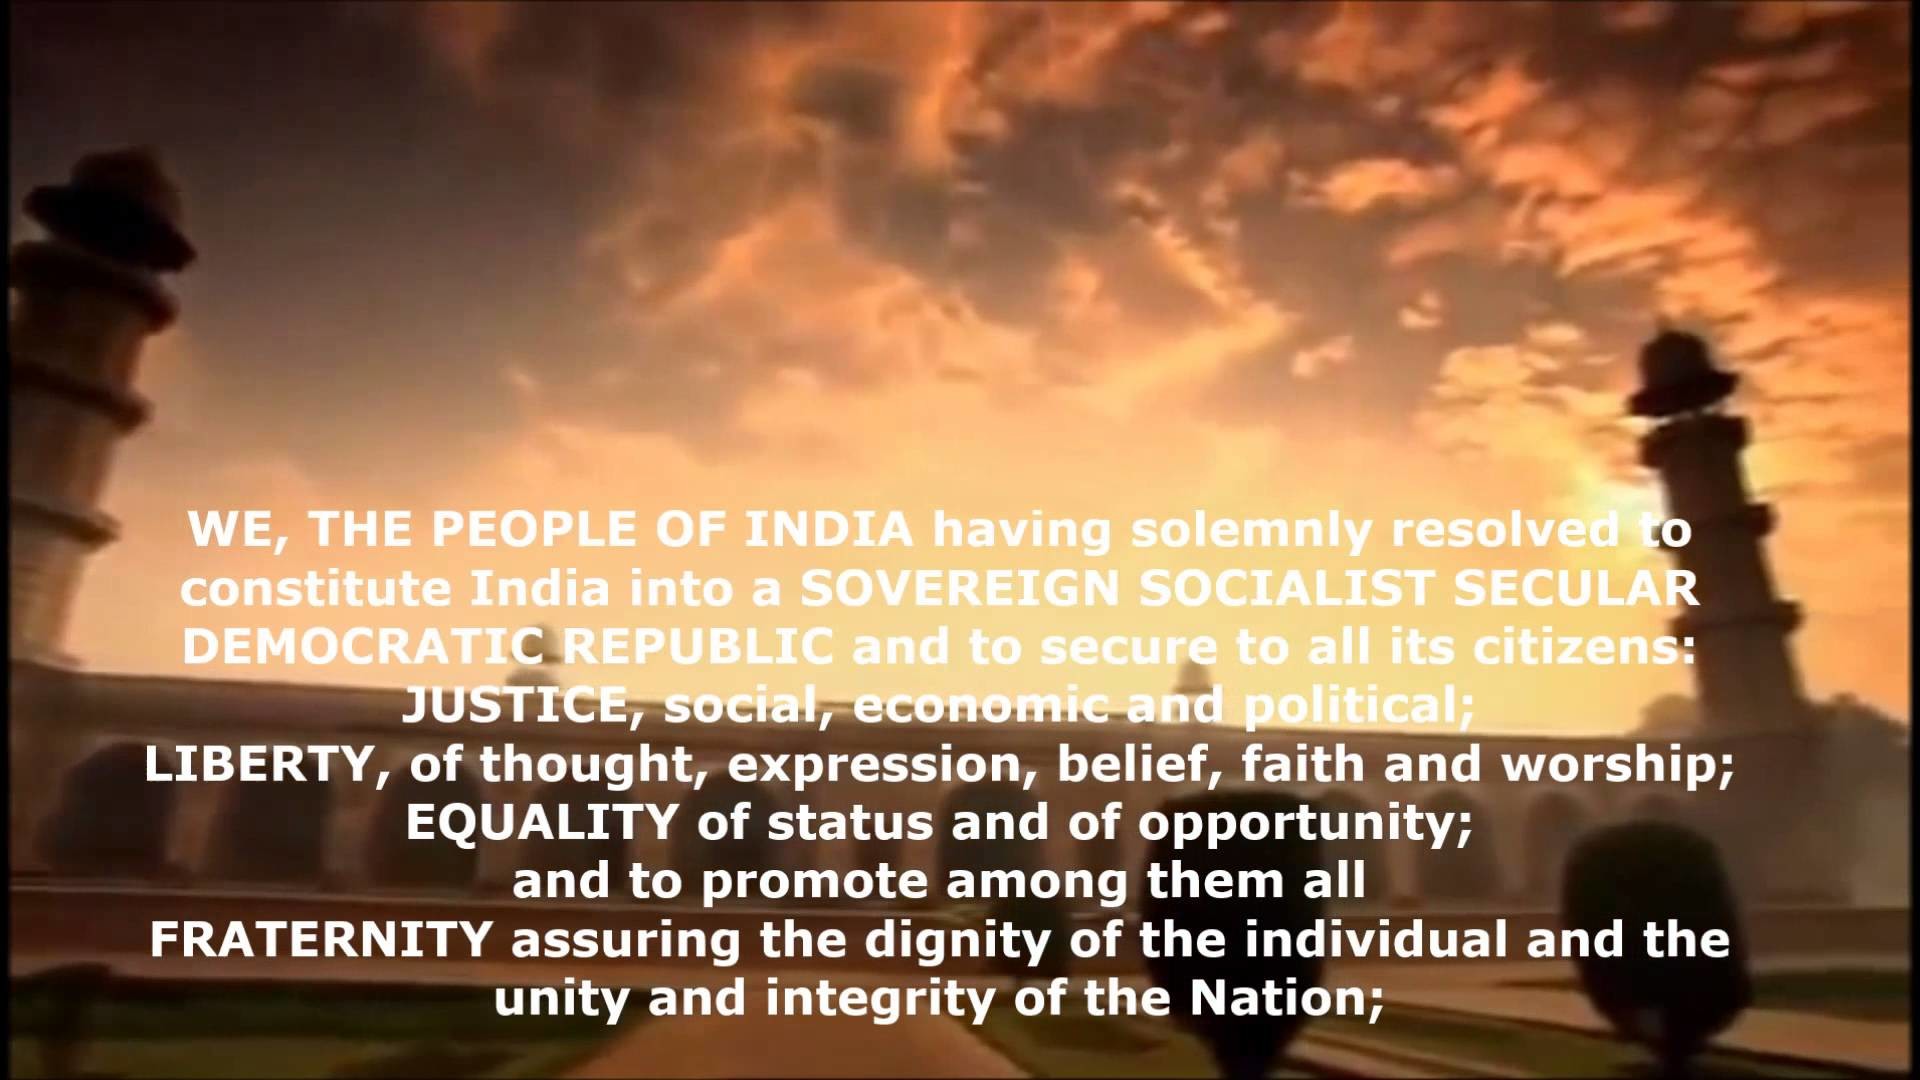 1920x1080 Preamble Of India - Essence of Republic of India